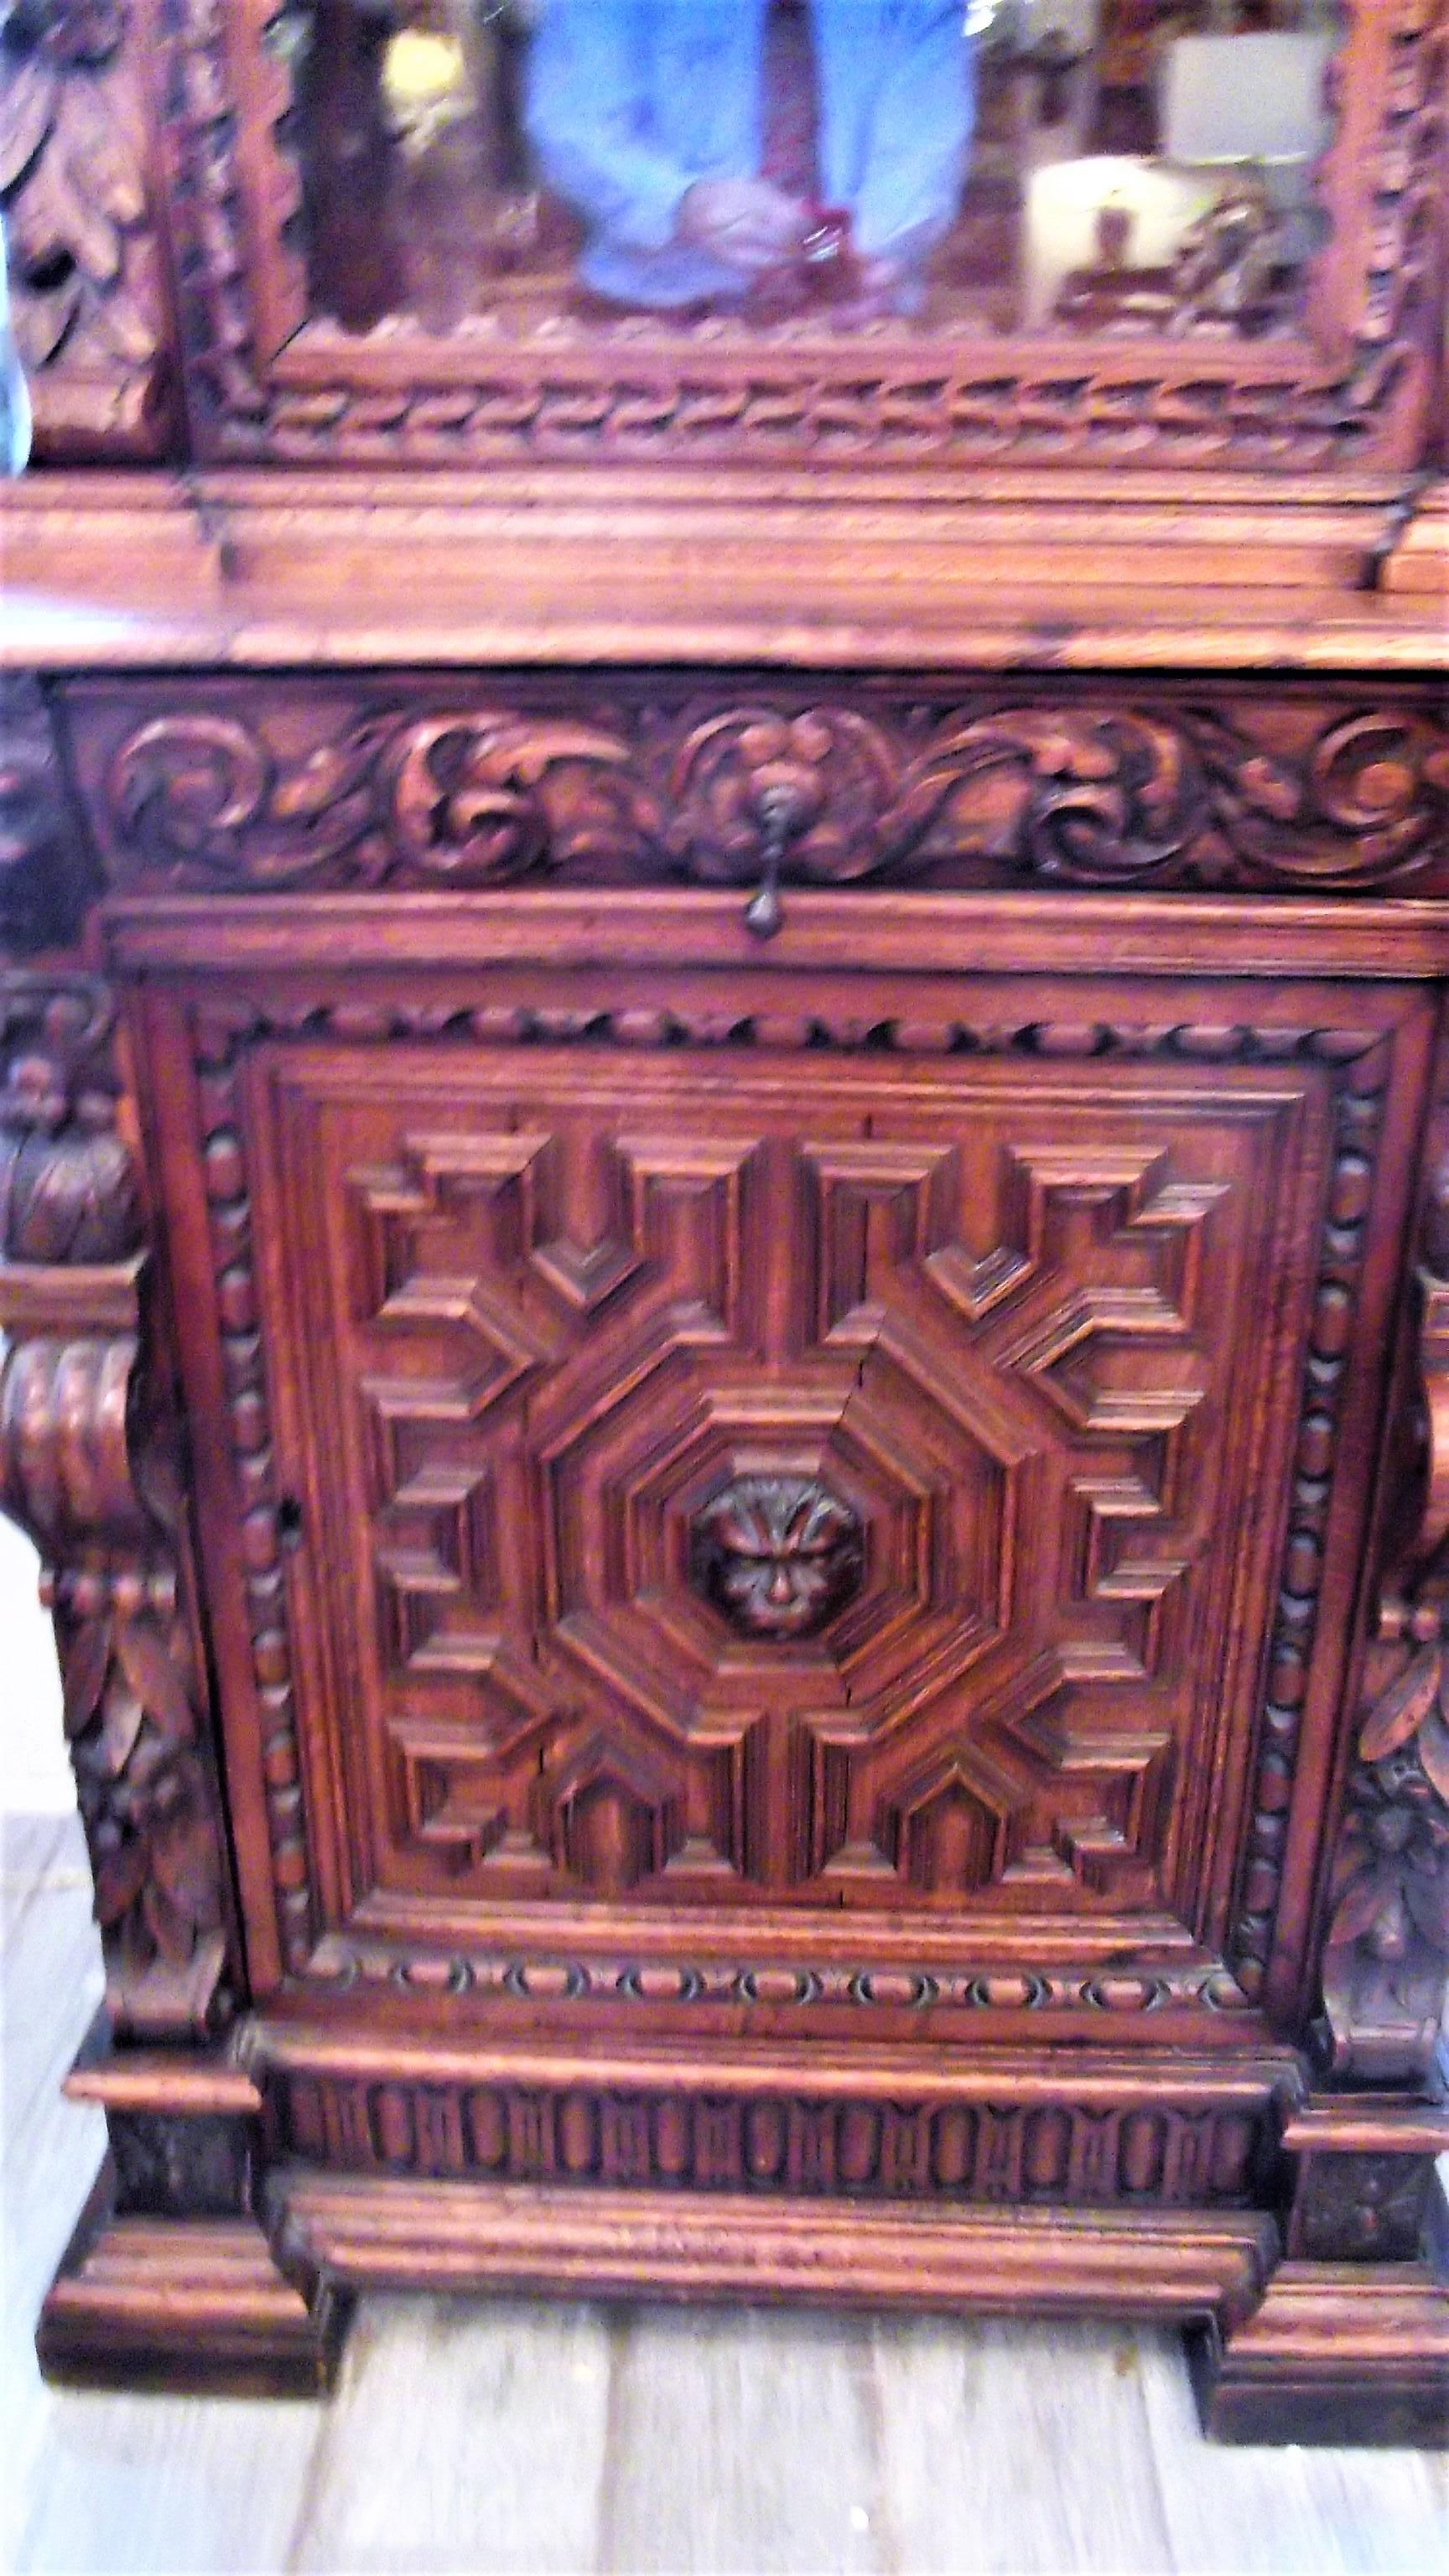 Beautiful hand-carved oak English cabinet in the Renaissance Revival style. A single glass door reveals two carved shelves. The lover portion is a carved door which reveals a shelved storage compartment.